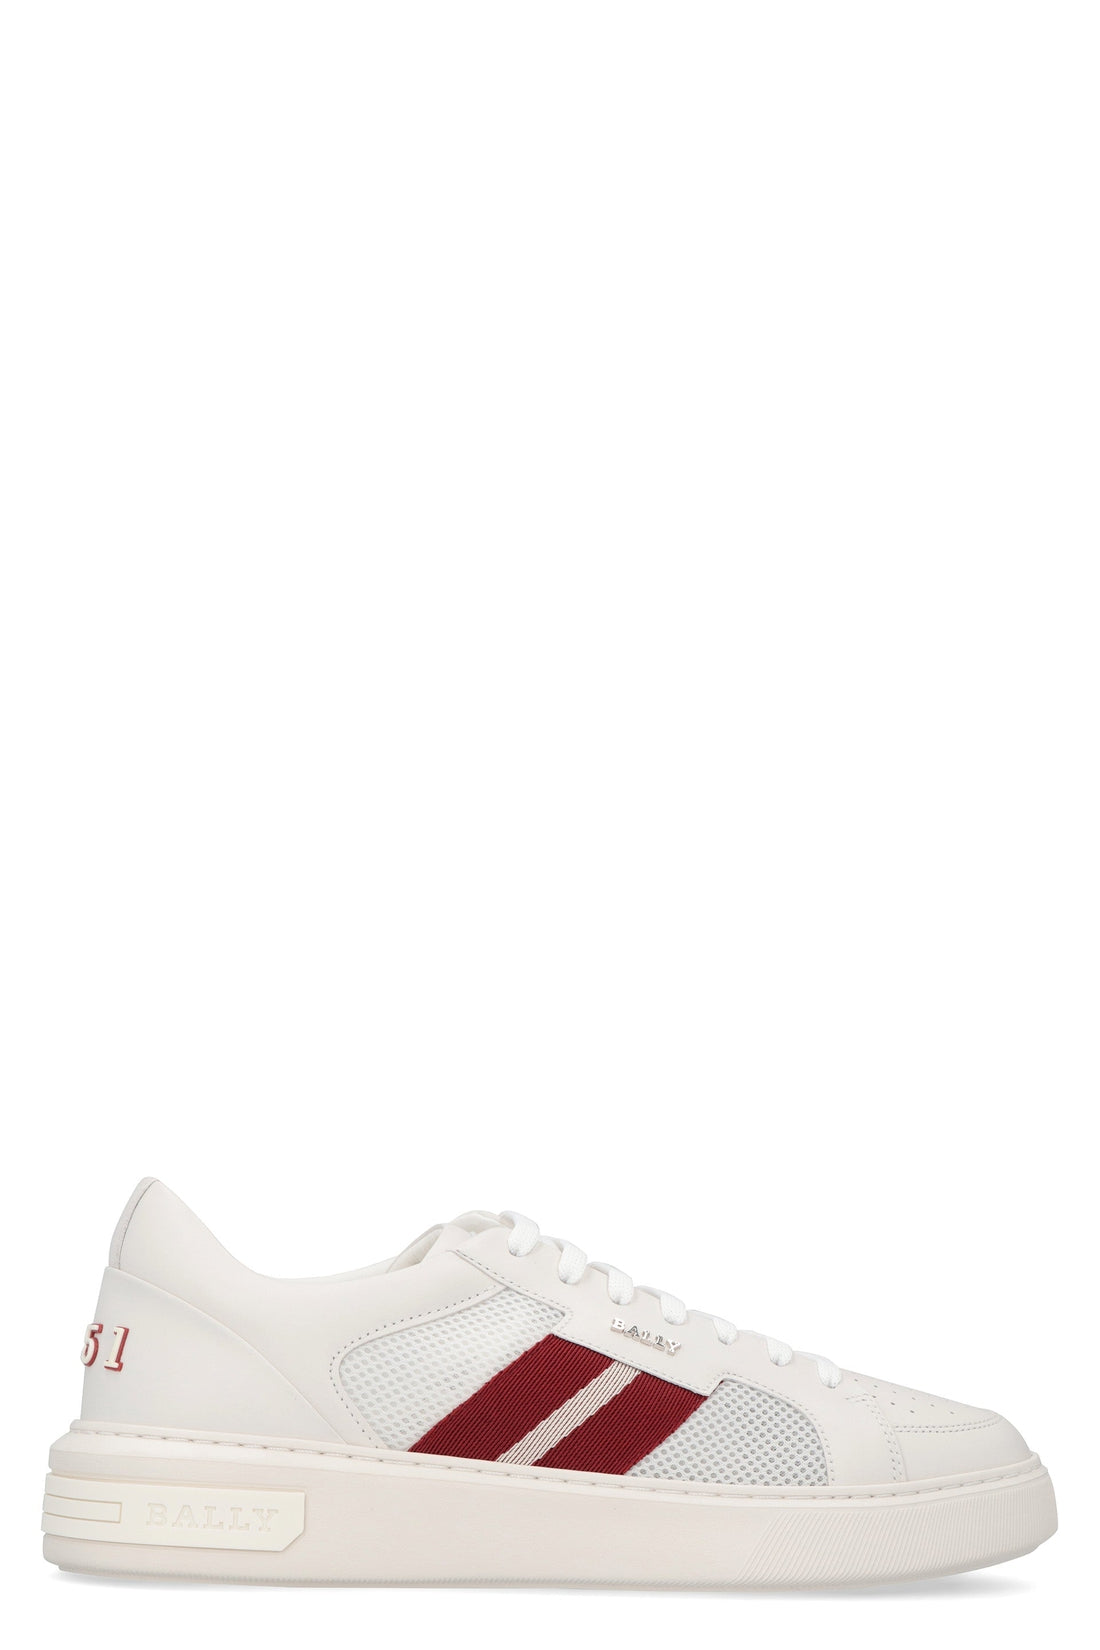 Bally-OUTLET-SALE-Melys-T leather and fabric low-top sneakers-ARCHIVIST